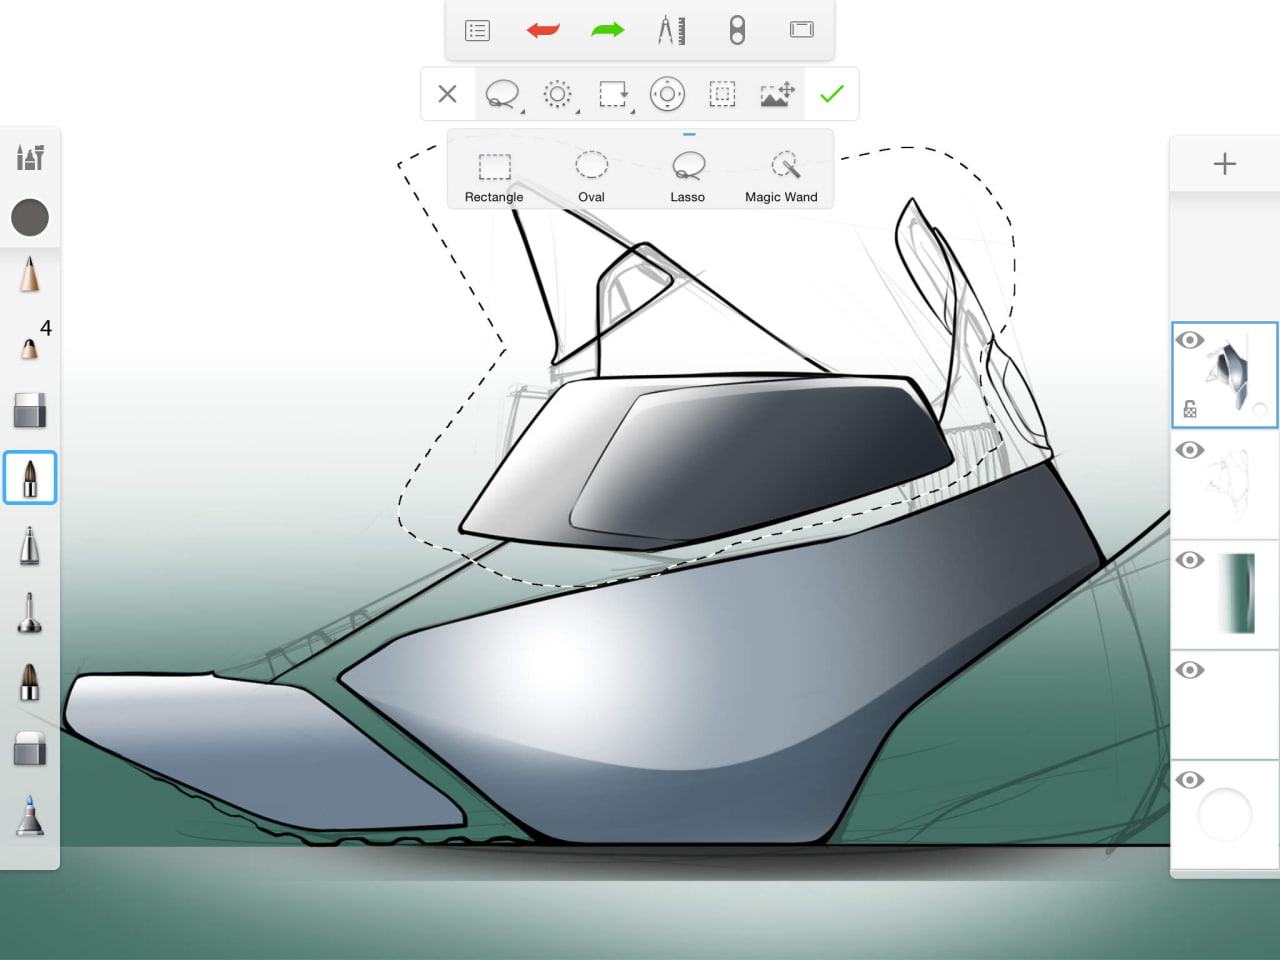 how to use autodesk sketchbook on phone